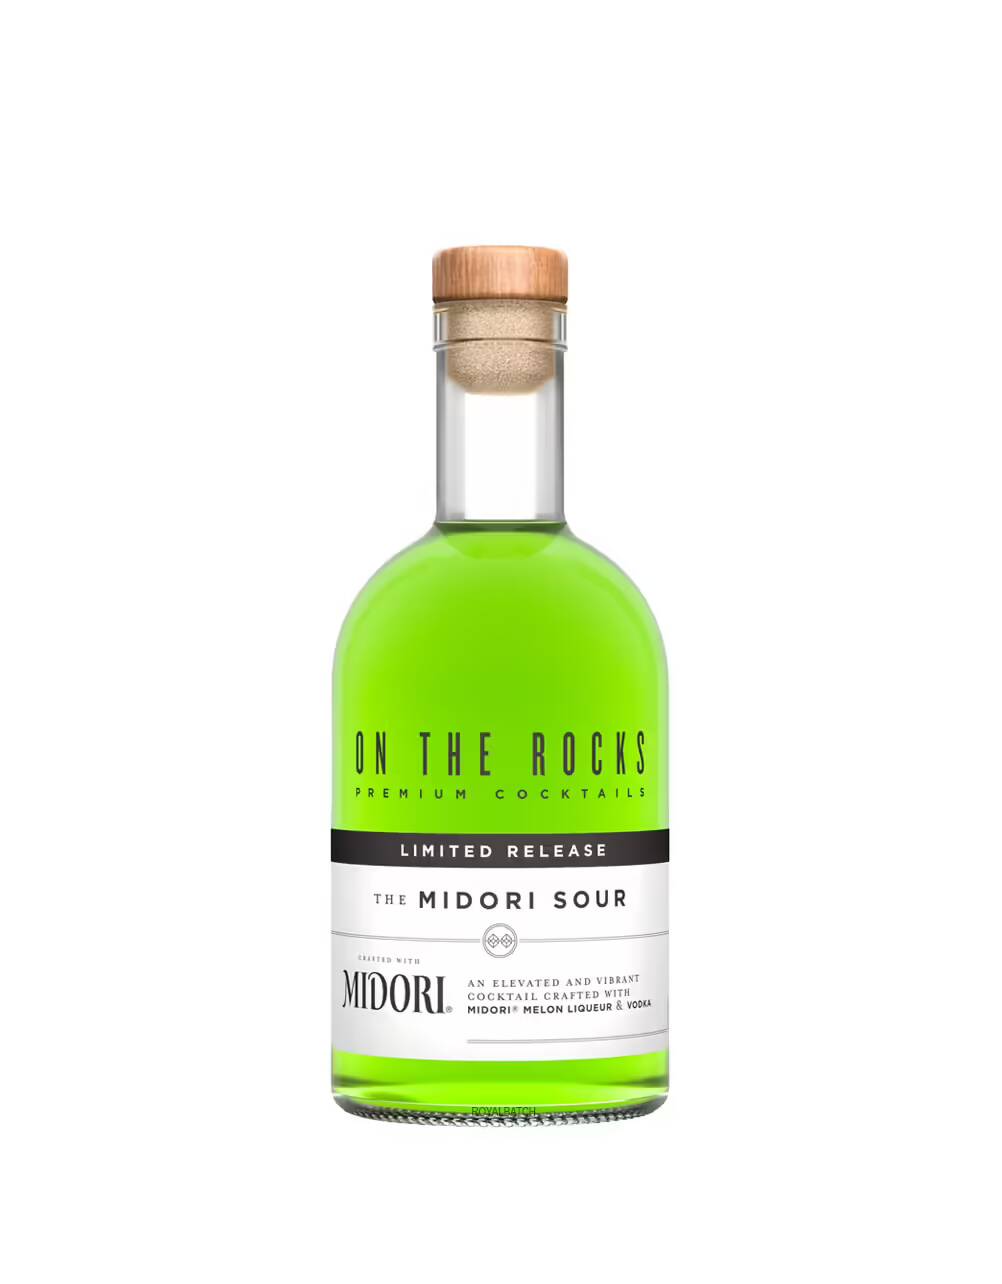 What is Midori, what does it taste like and how is made? - Wine Dharma